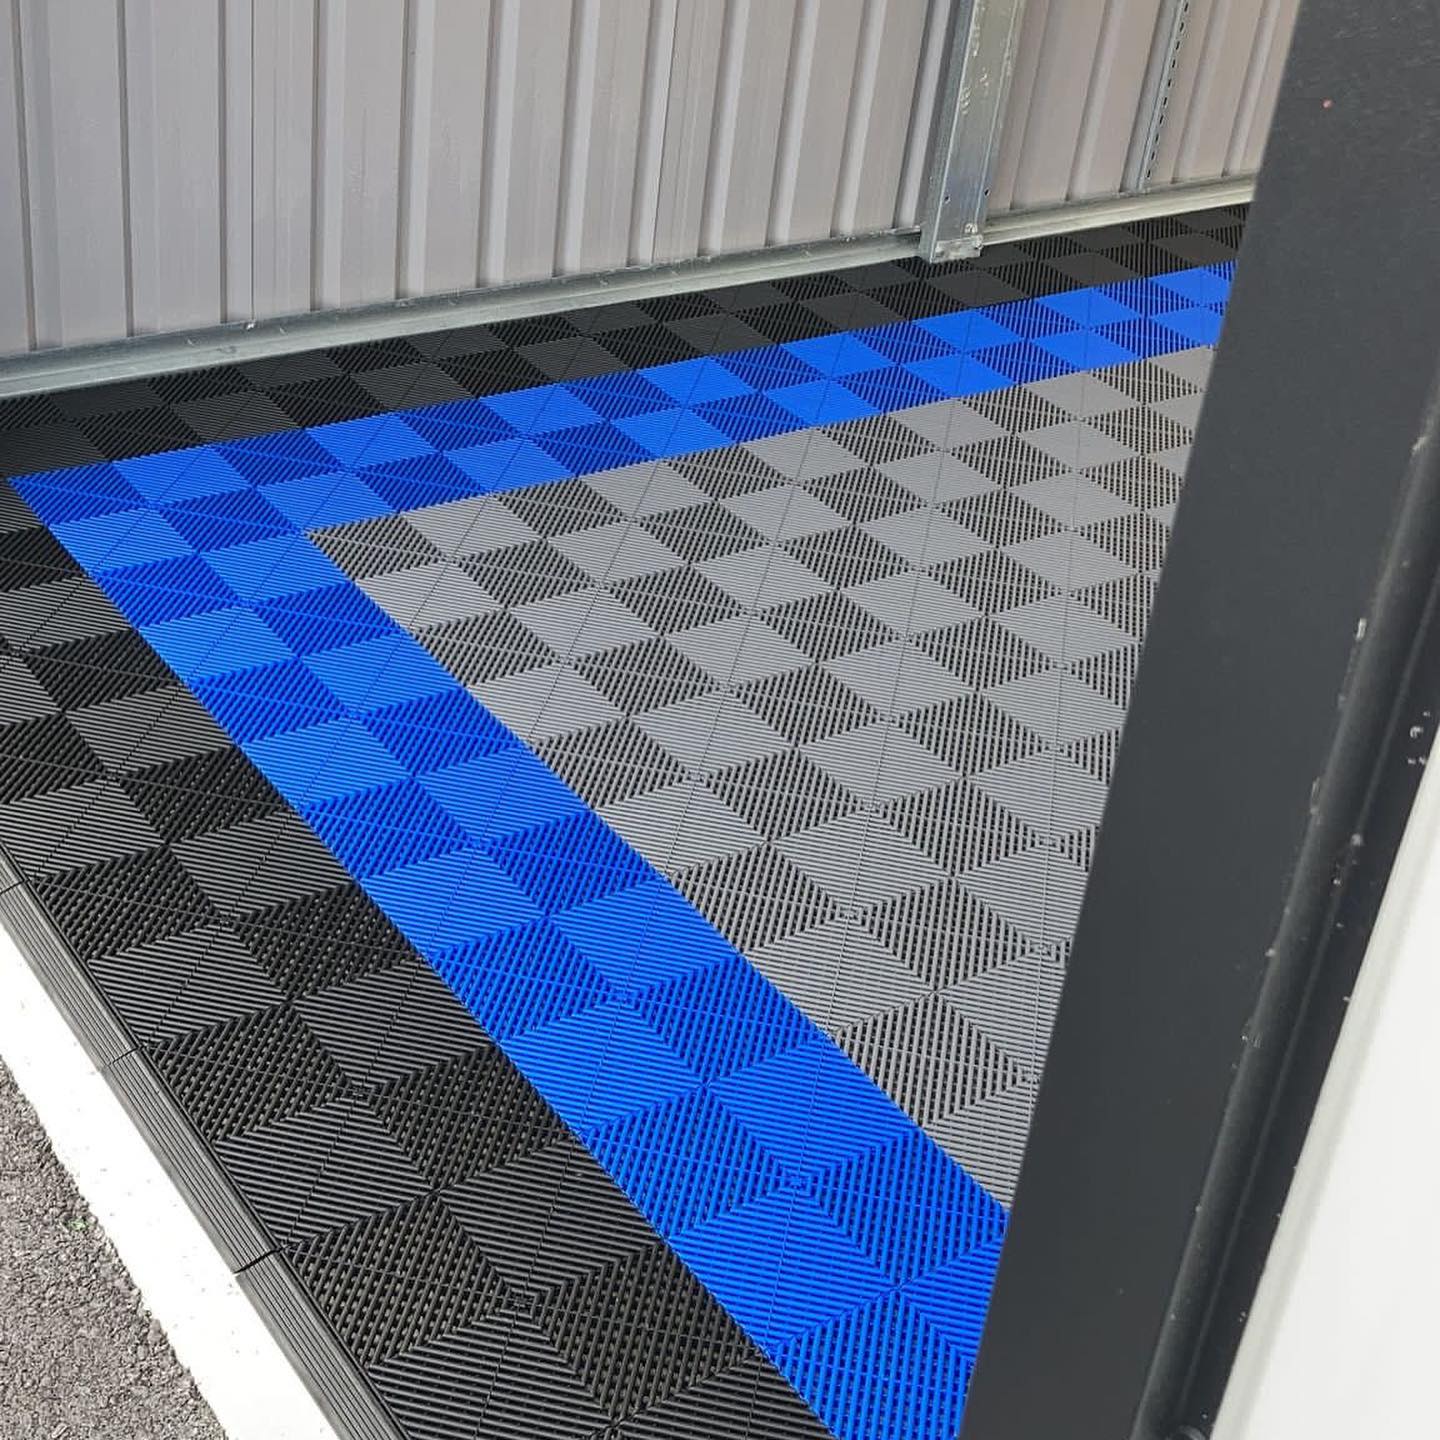 Give your garage the wow factor with Tuff Tiles